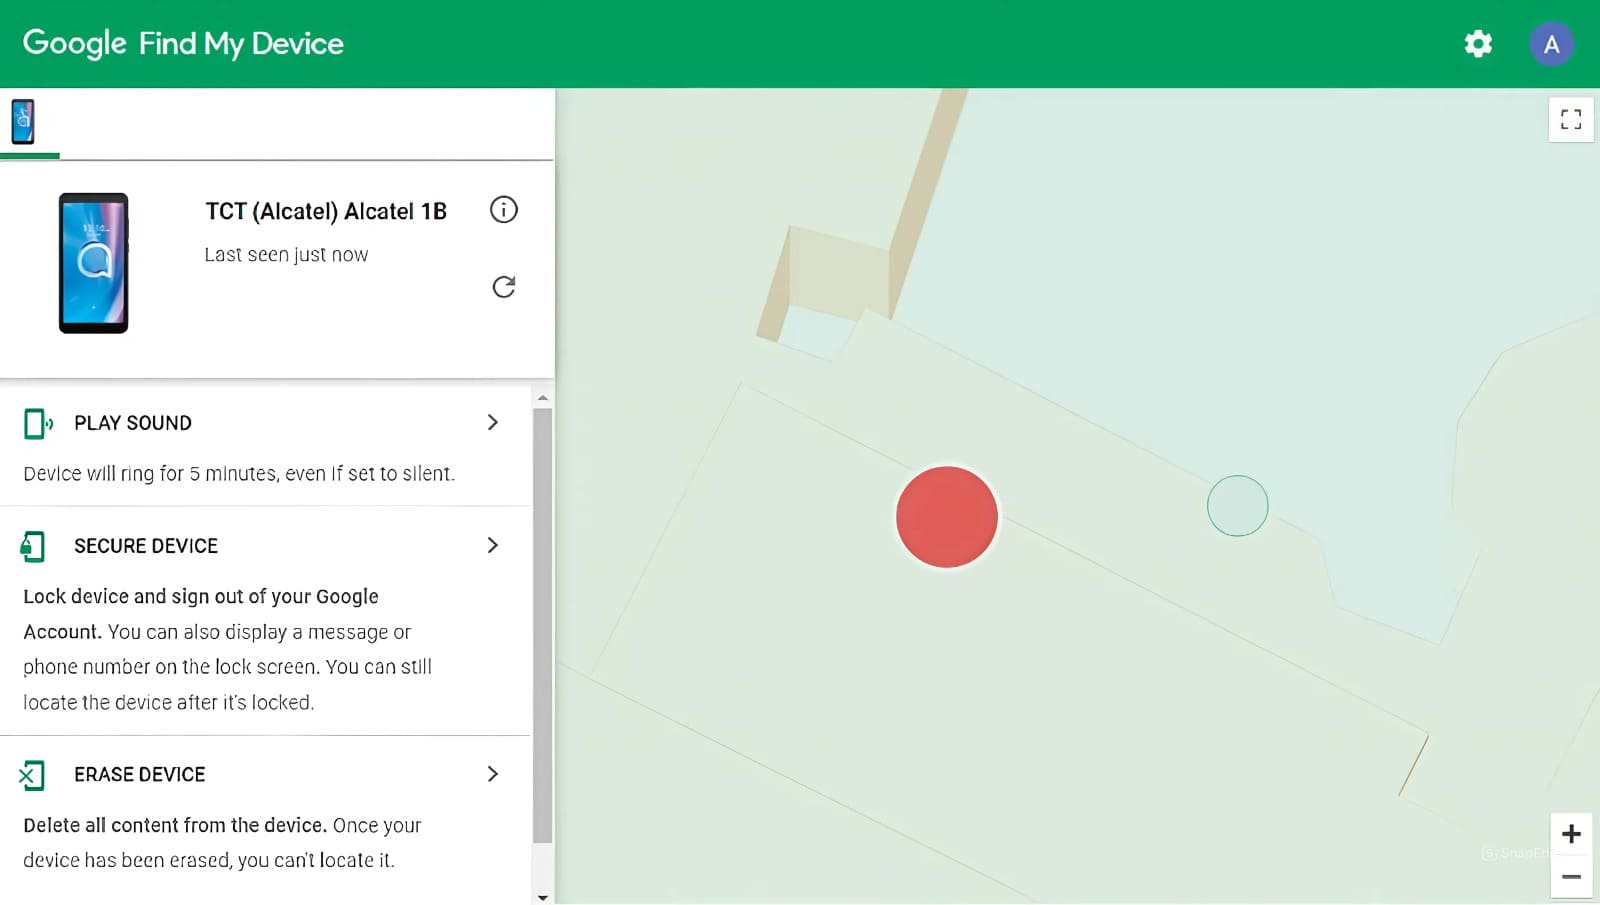 An image of Google Find My Device showing the location of Alcatel phone on Google Maps